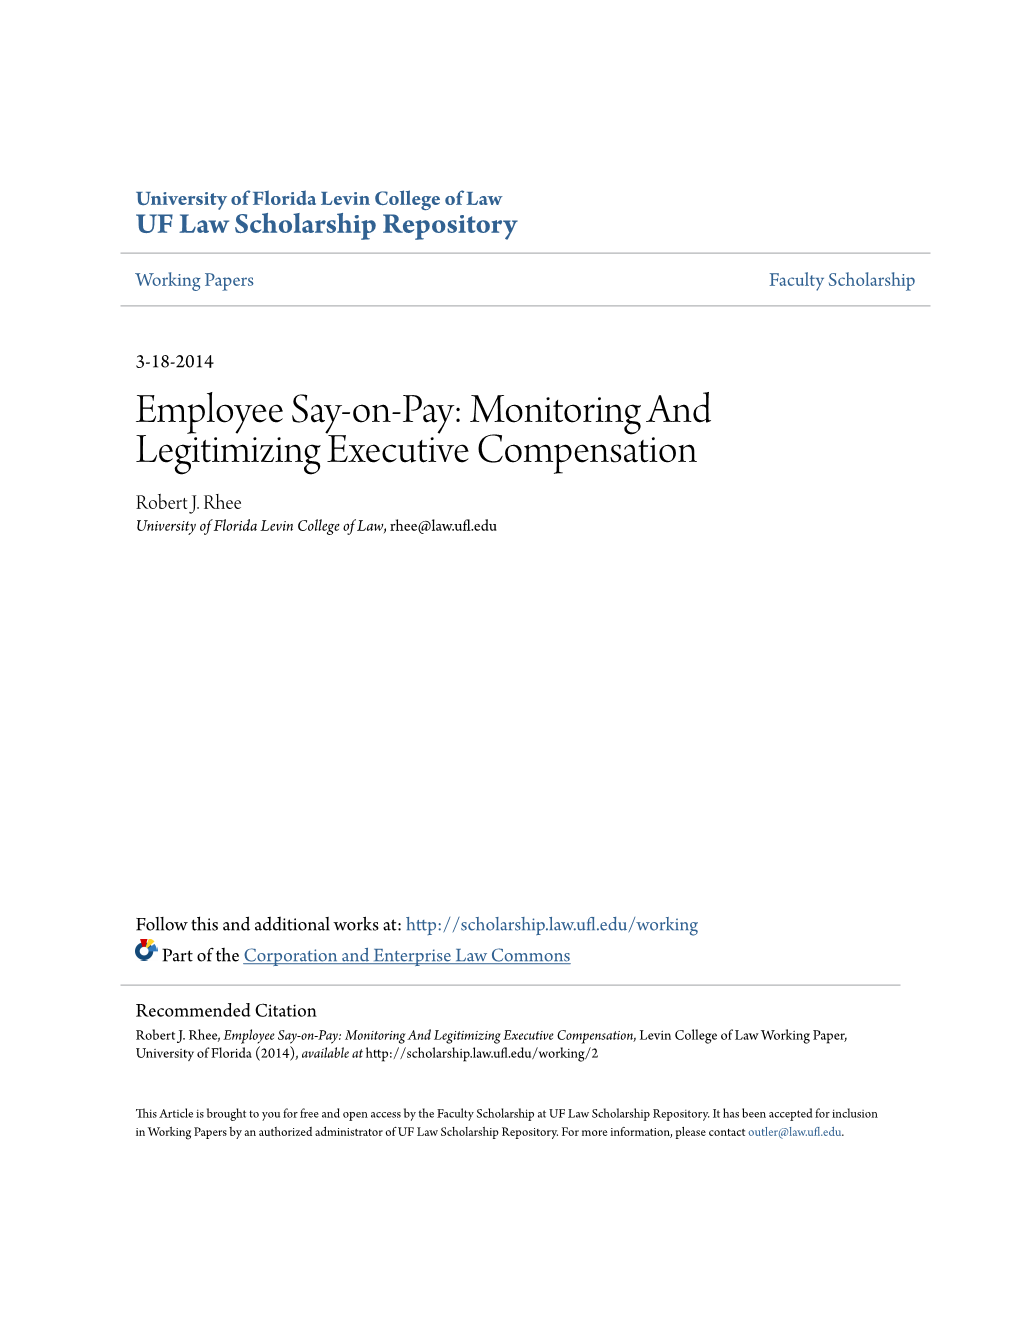 Employee Say-On-Pay: Monitoring and Legitimizing Executive Compensation Robert J